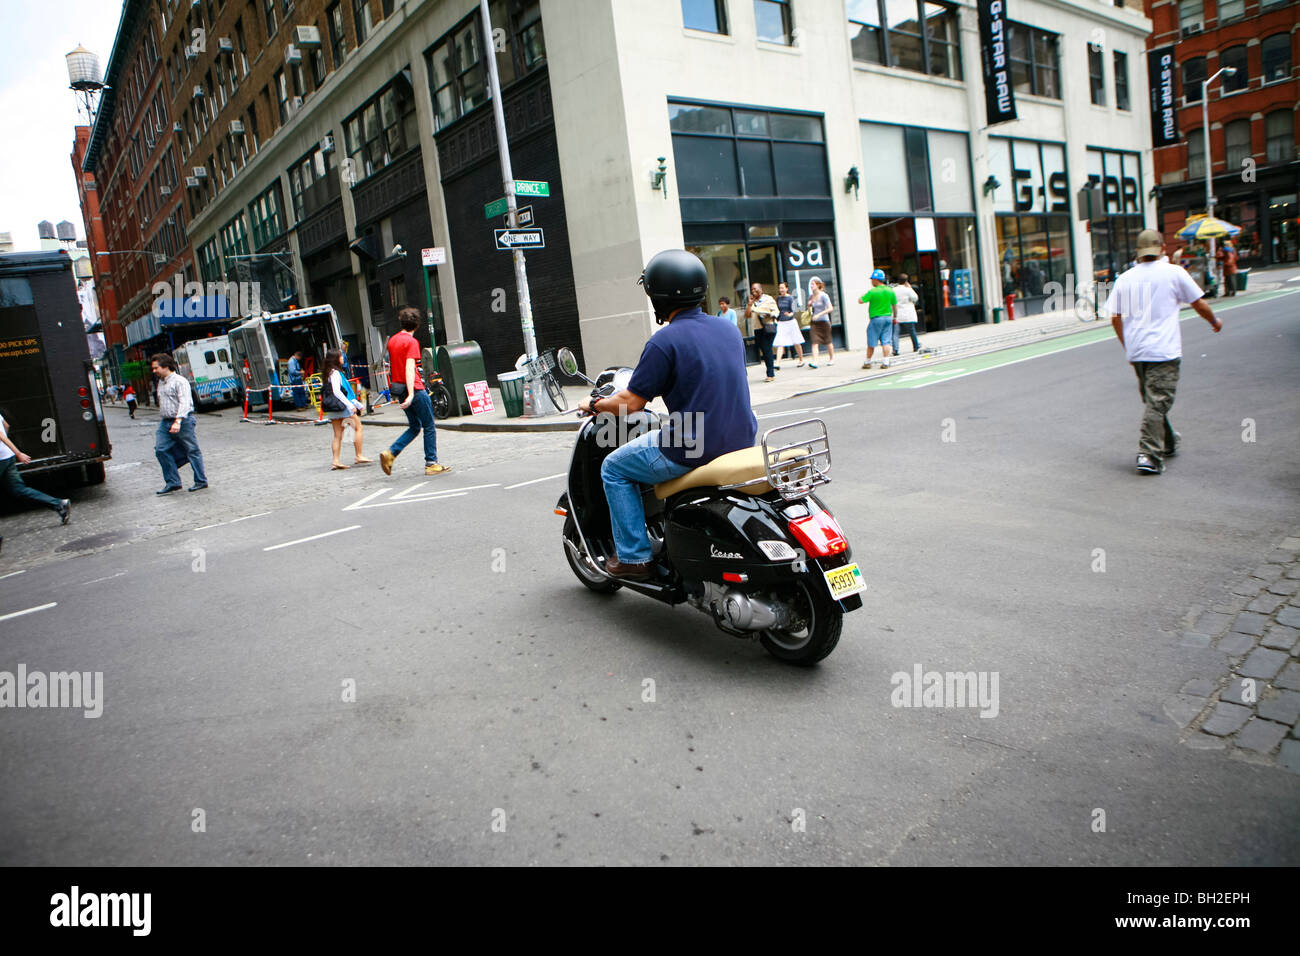 the Vespa in New York streets, an Italian line of scooters manufactured by Piaggio. Stock Photo